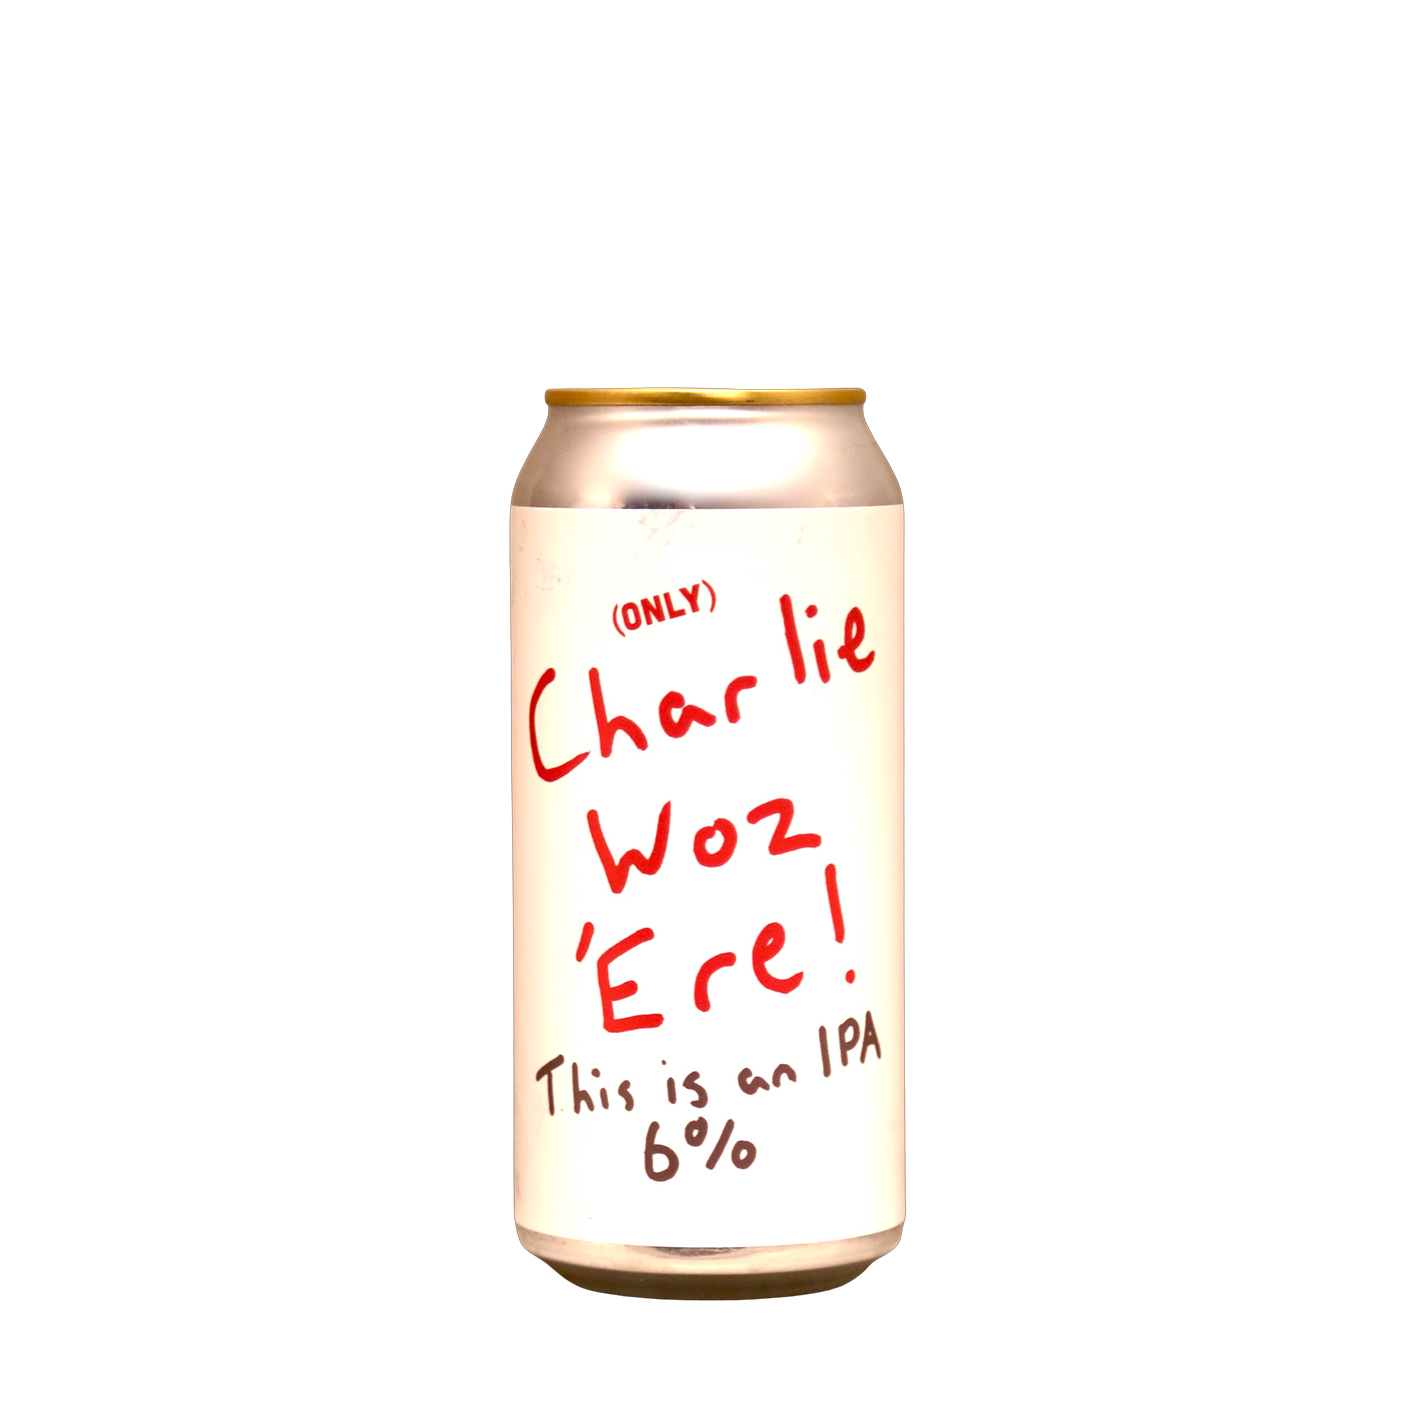 Pretty Decent - (only) Charlie Woz 'Ere IPA | Buy Online